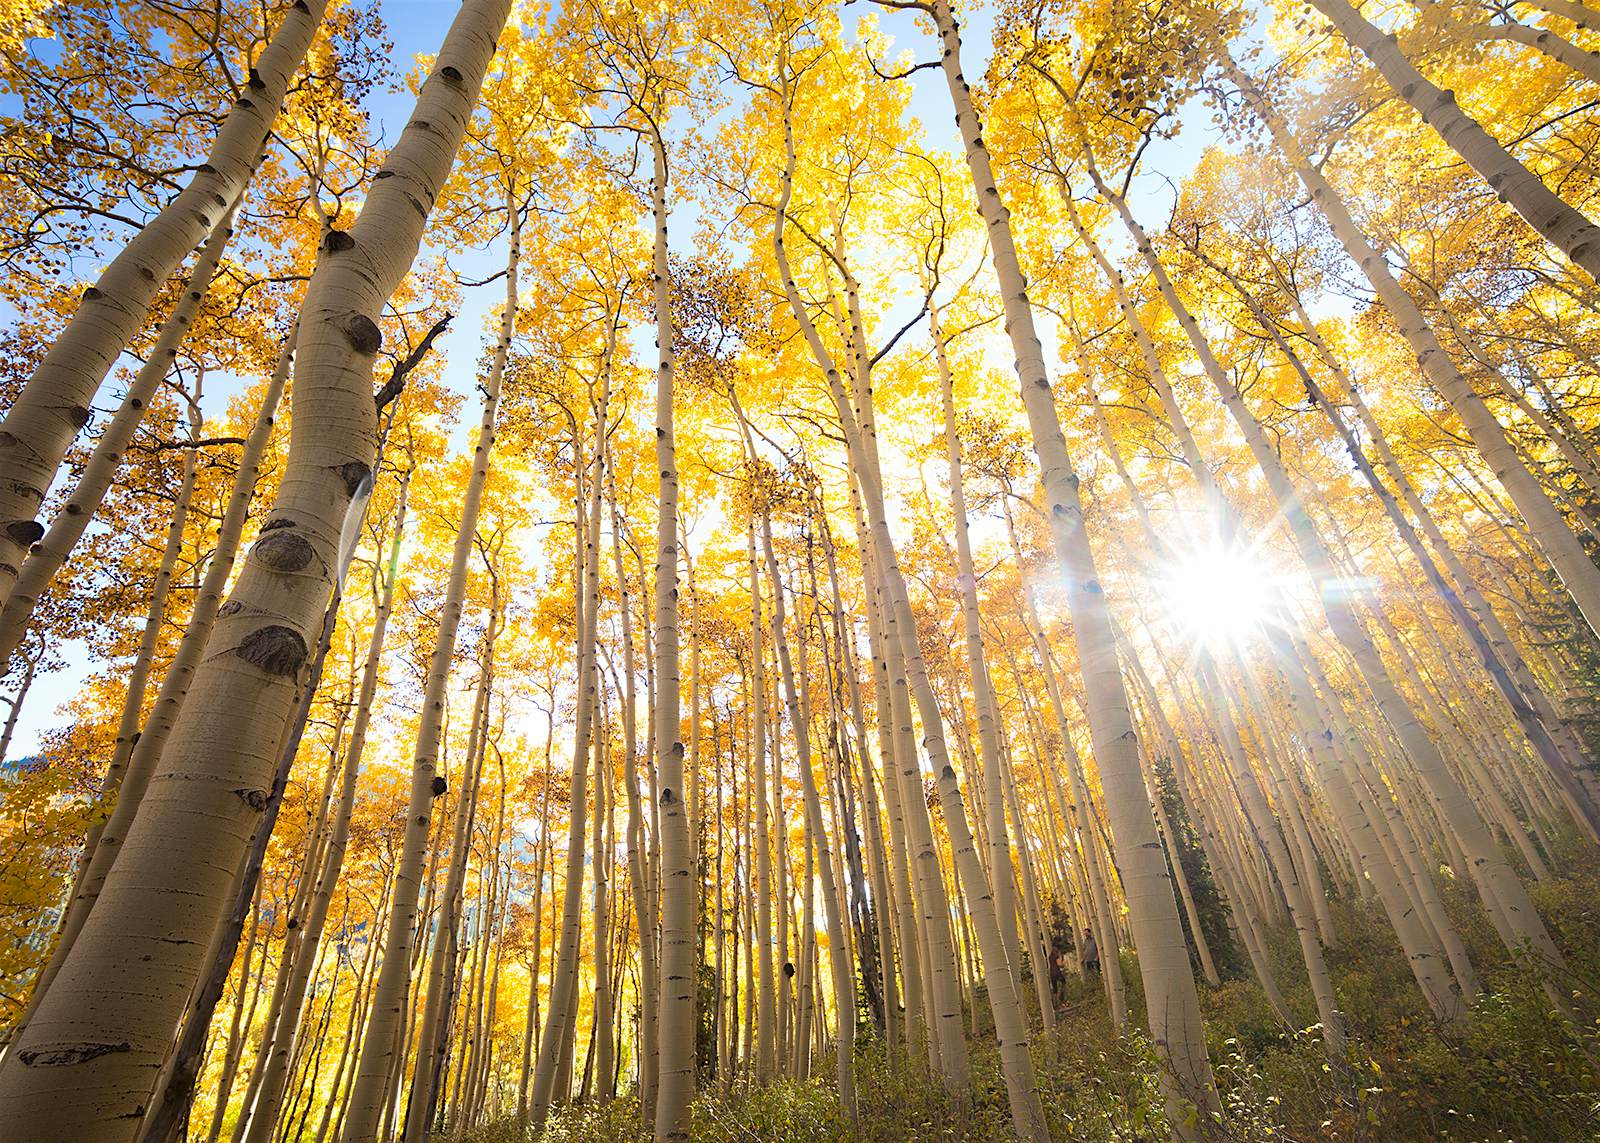 An upwards angle of many thin, tall tree trunks, with yellow leaves above and bright sunlight breaking through